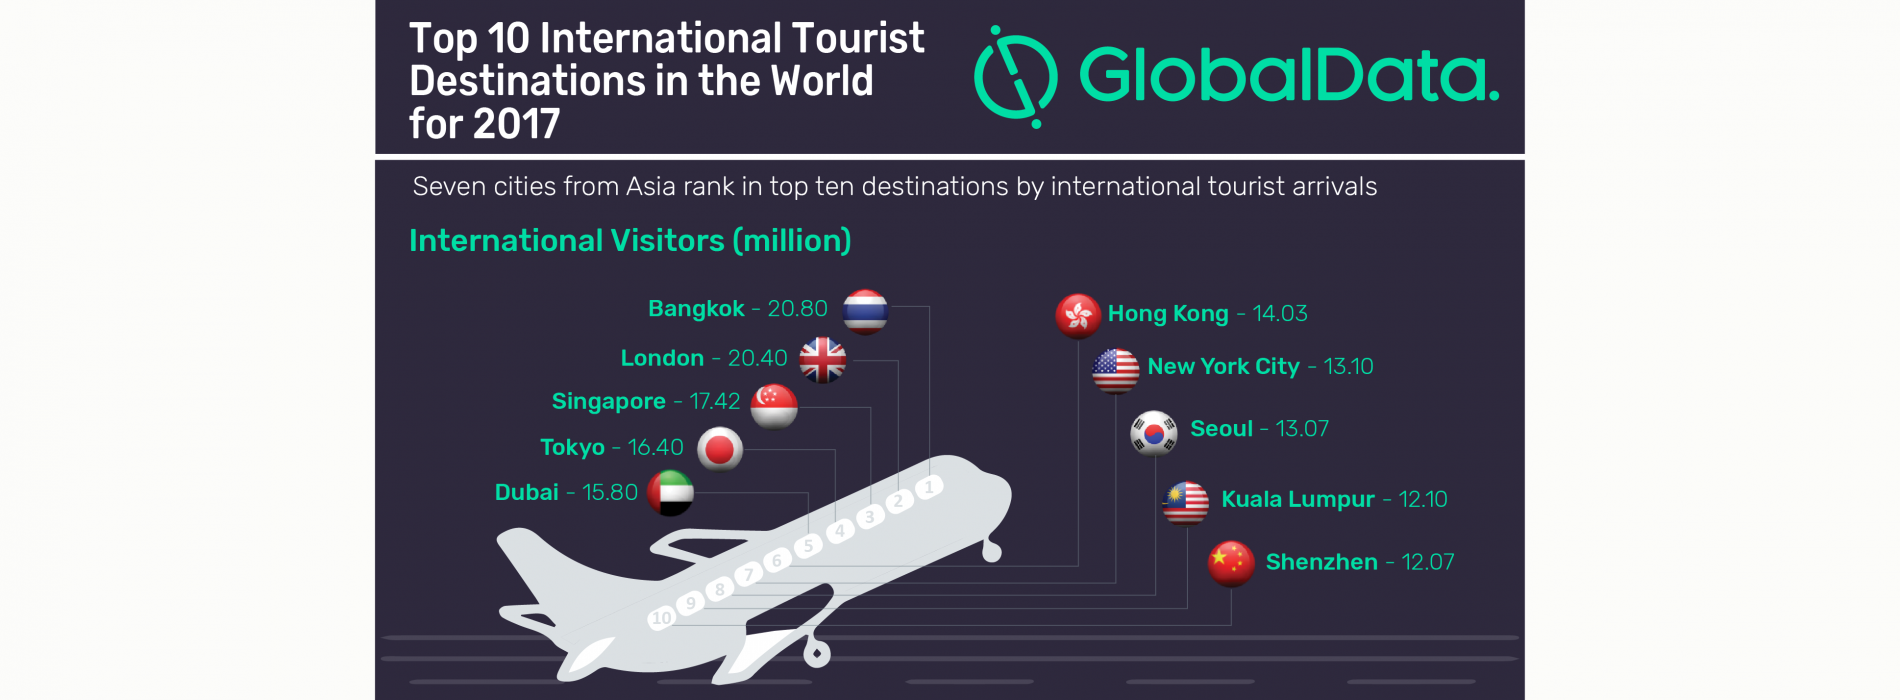 Asian cities dominate top 10 rankings of international tourist arrivals in 2017, says GlobalData